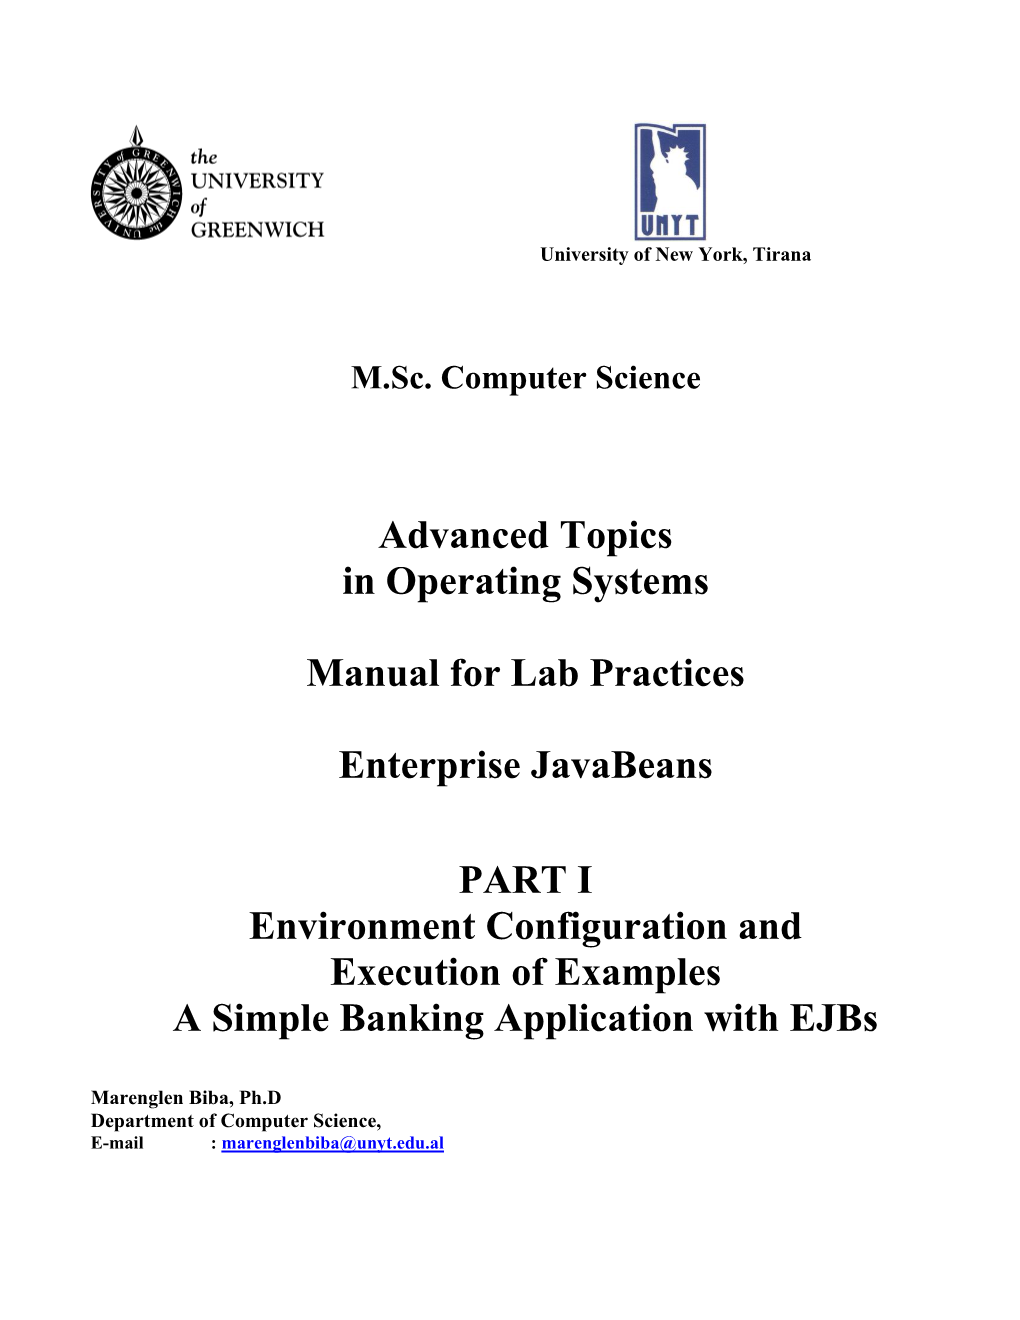 Advanced Topics in Operating Systems Manual for Lab Practices